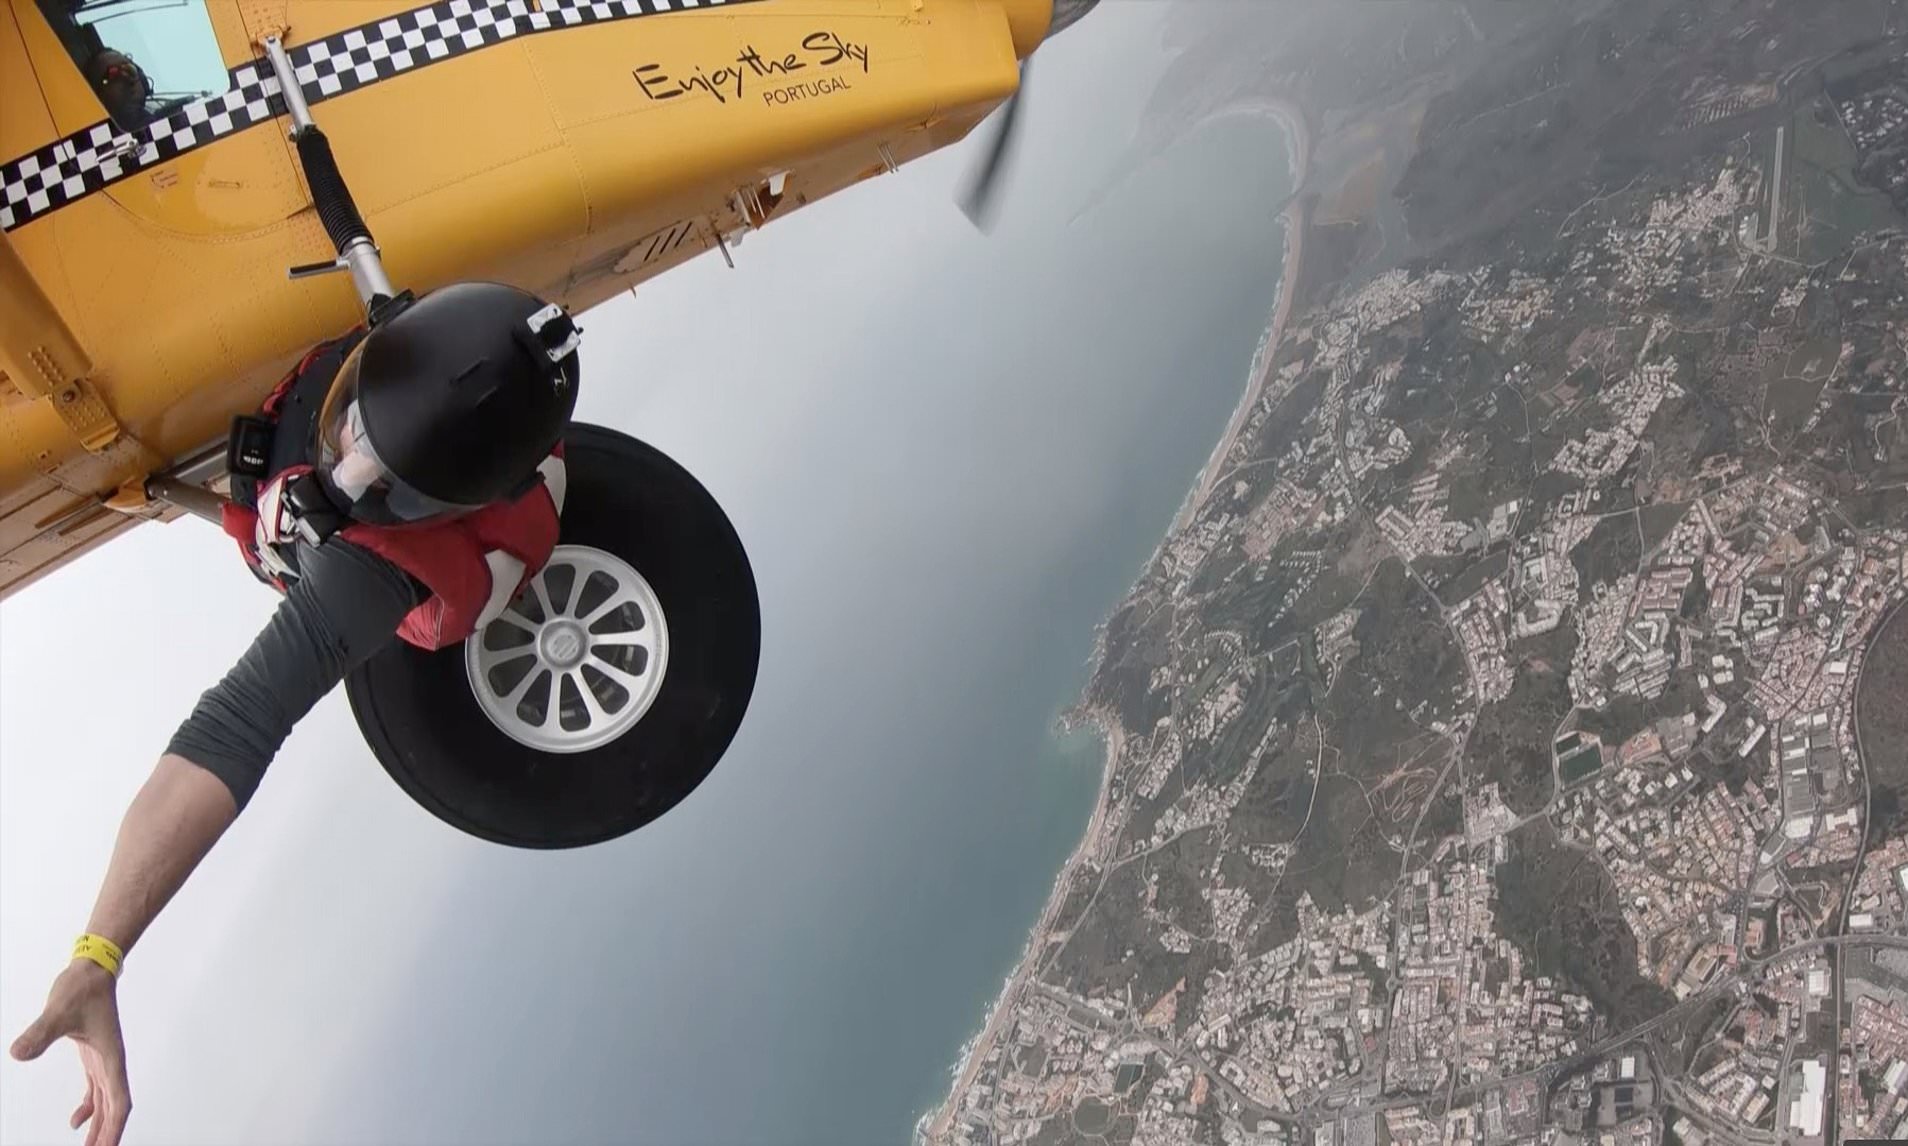 Bananas! Bizarre moment a daredevil climbs out of a plane to take fruit from a wingsuit flier